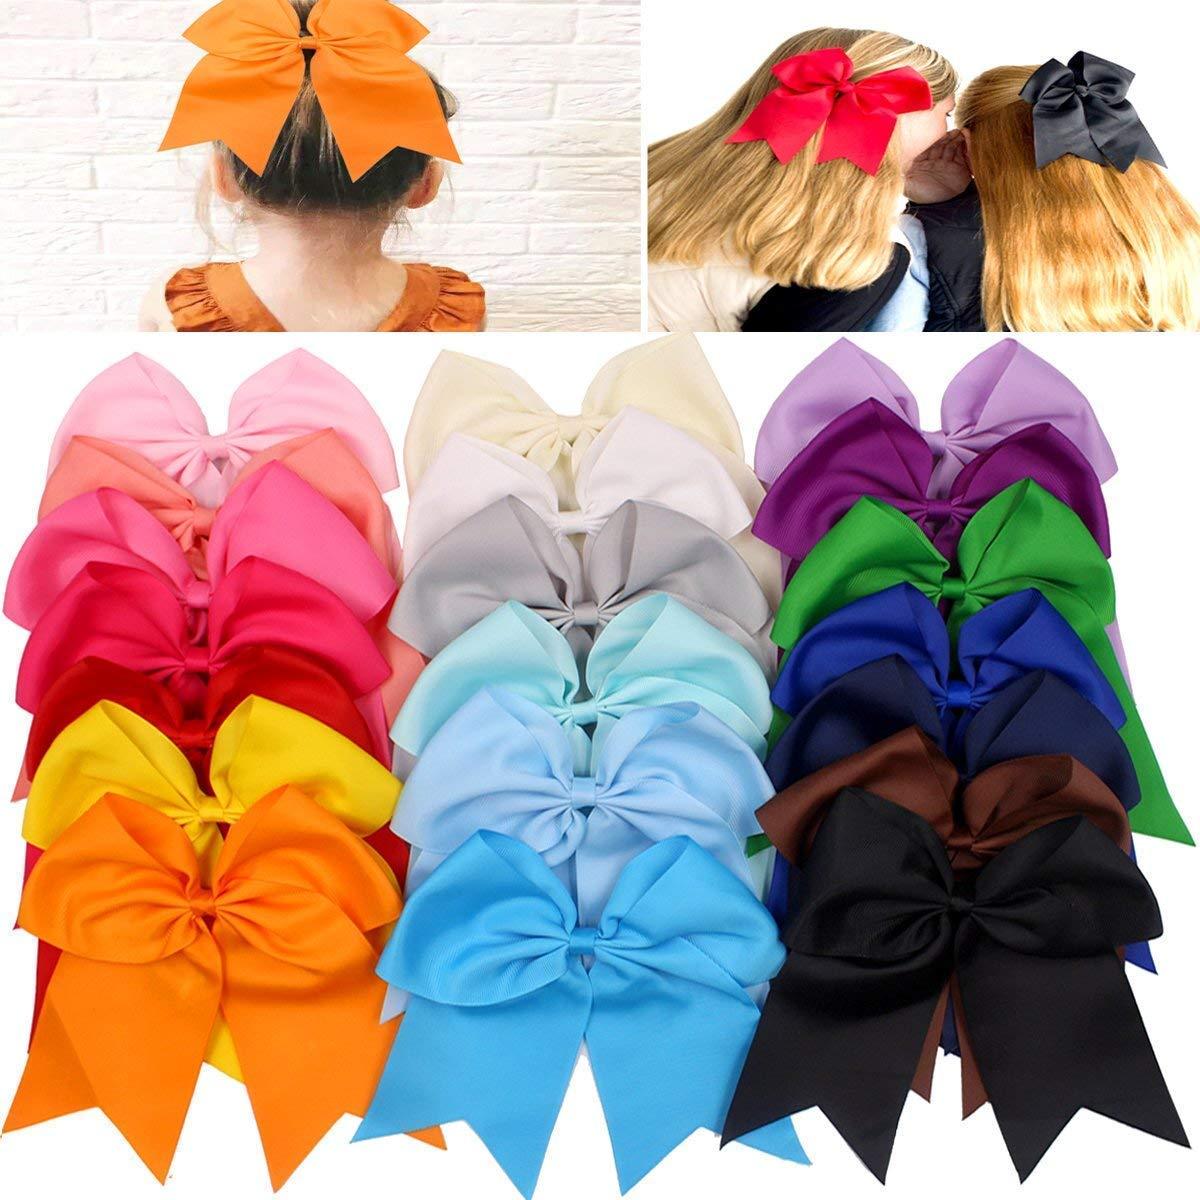 2 Pcs Cheerleading Hair Tie with Curly Ribbons, Rainbow Wig Shape Hair Bows, Hair Ties Hair Bands Ponytail Holders for Women,Temu